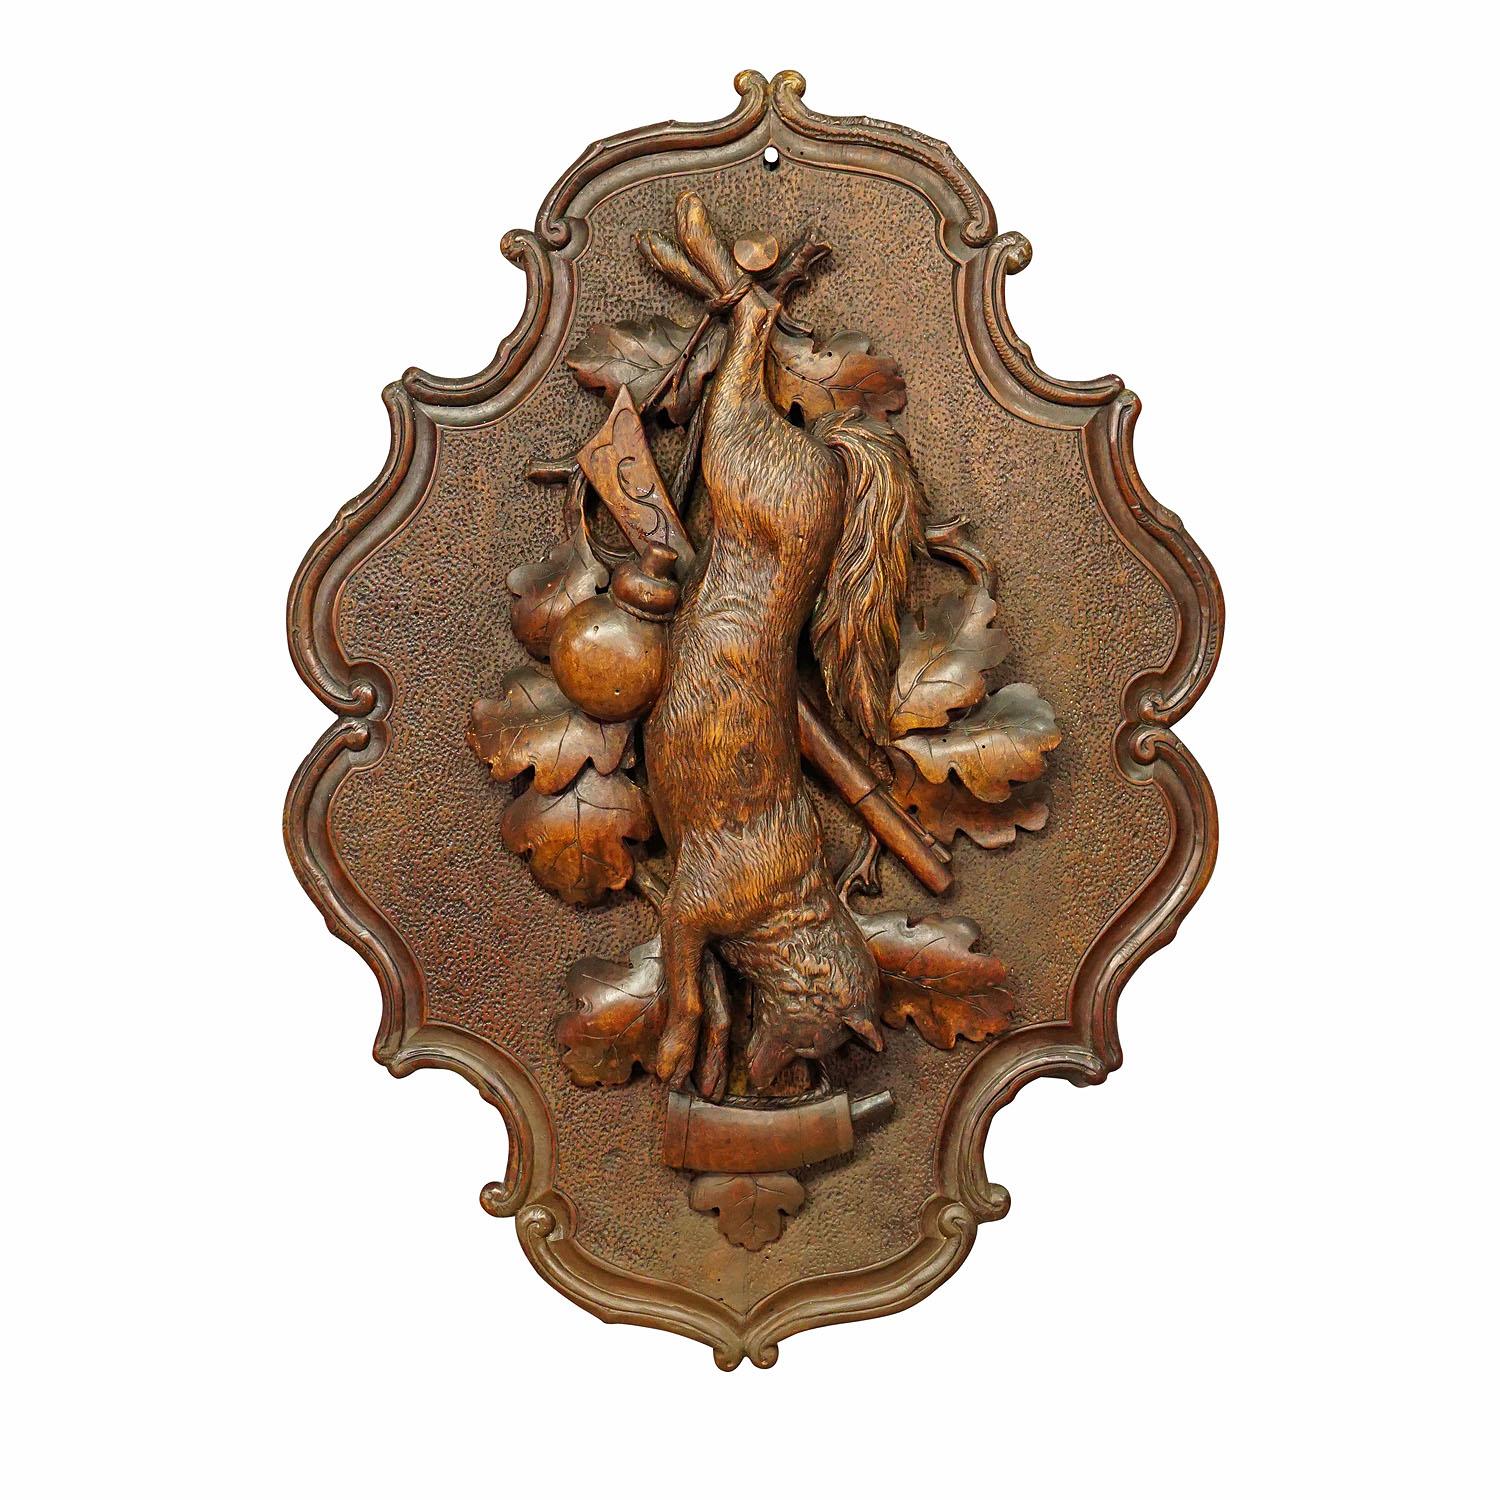 Antique wooden carved black forest game plaque with fox.

An antique wooden hunting game plaque with impressive carving of a fox and hunting accessoires. Black Forest, executed ca. 1900. Very good condition. This plaque is a splendid addition to